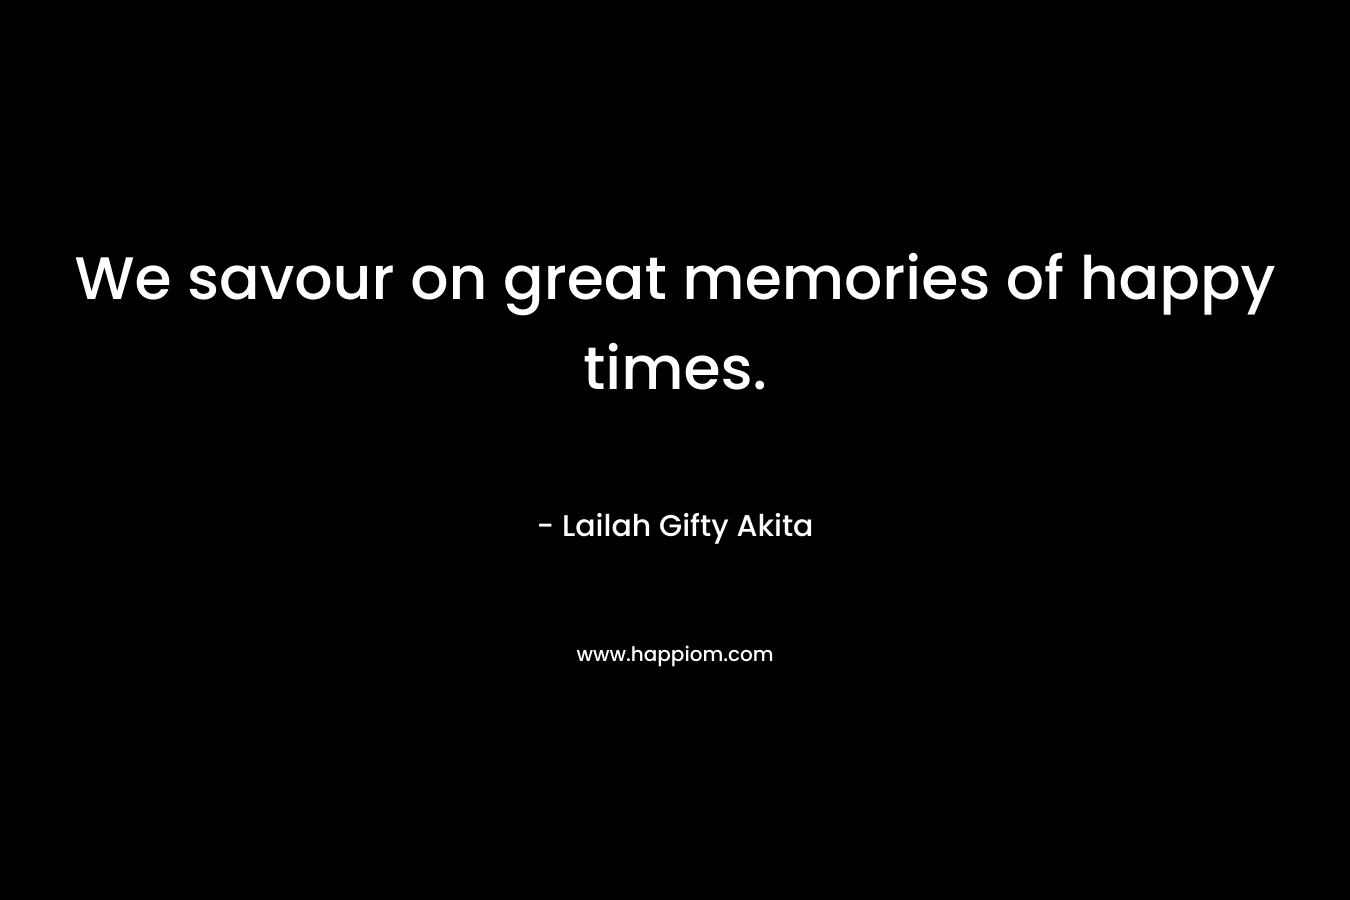 We savour on great memories of happy times. – Lailah Gifty Akita